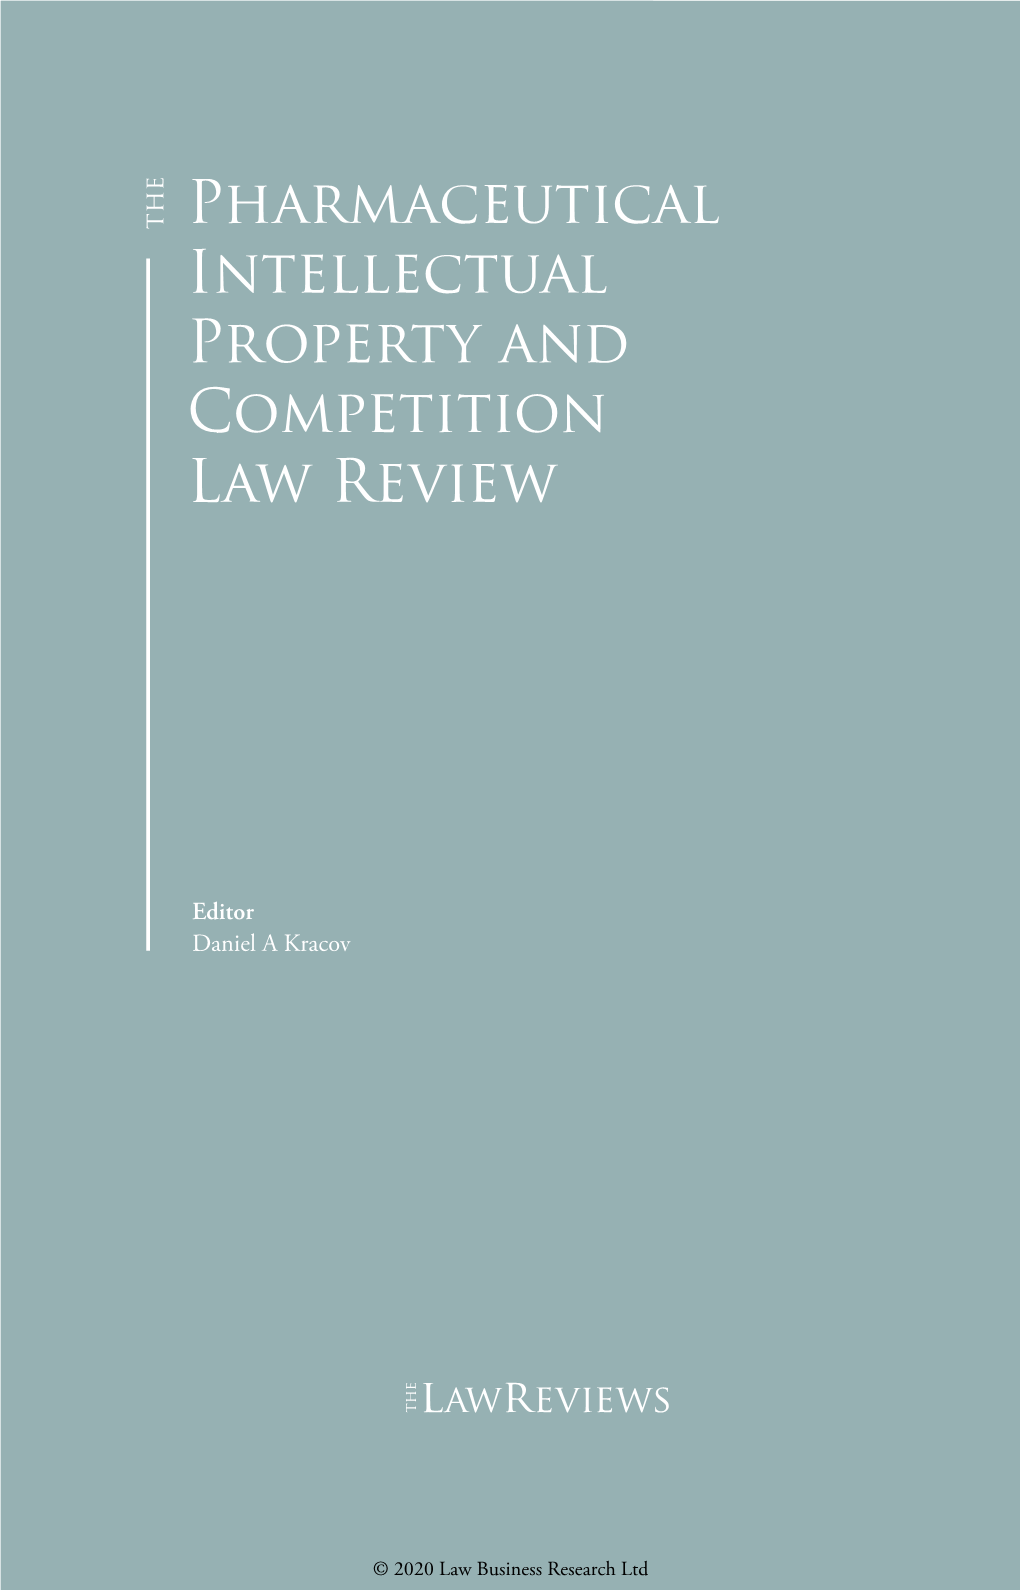 The Pharmaceutical Intellectual Property and Competition Law Review